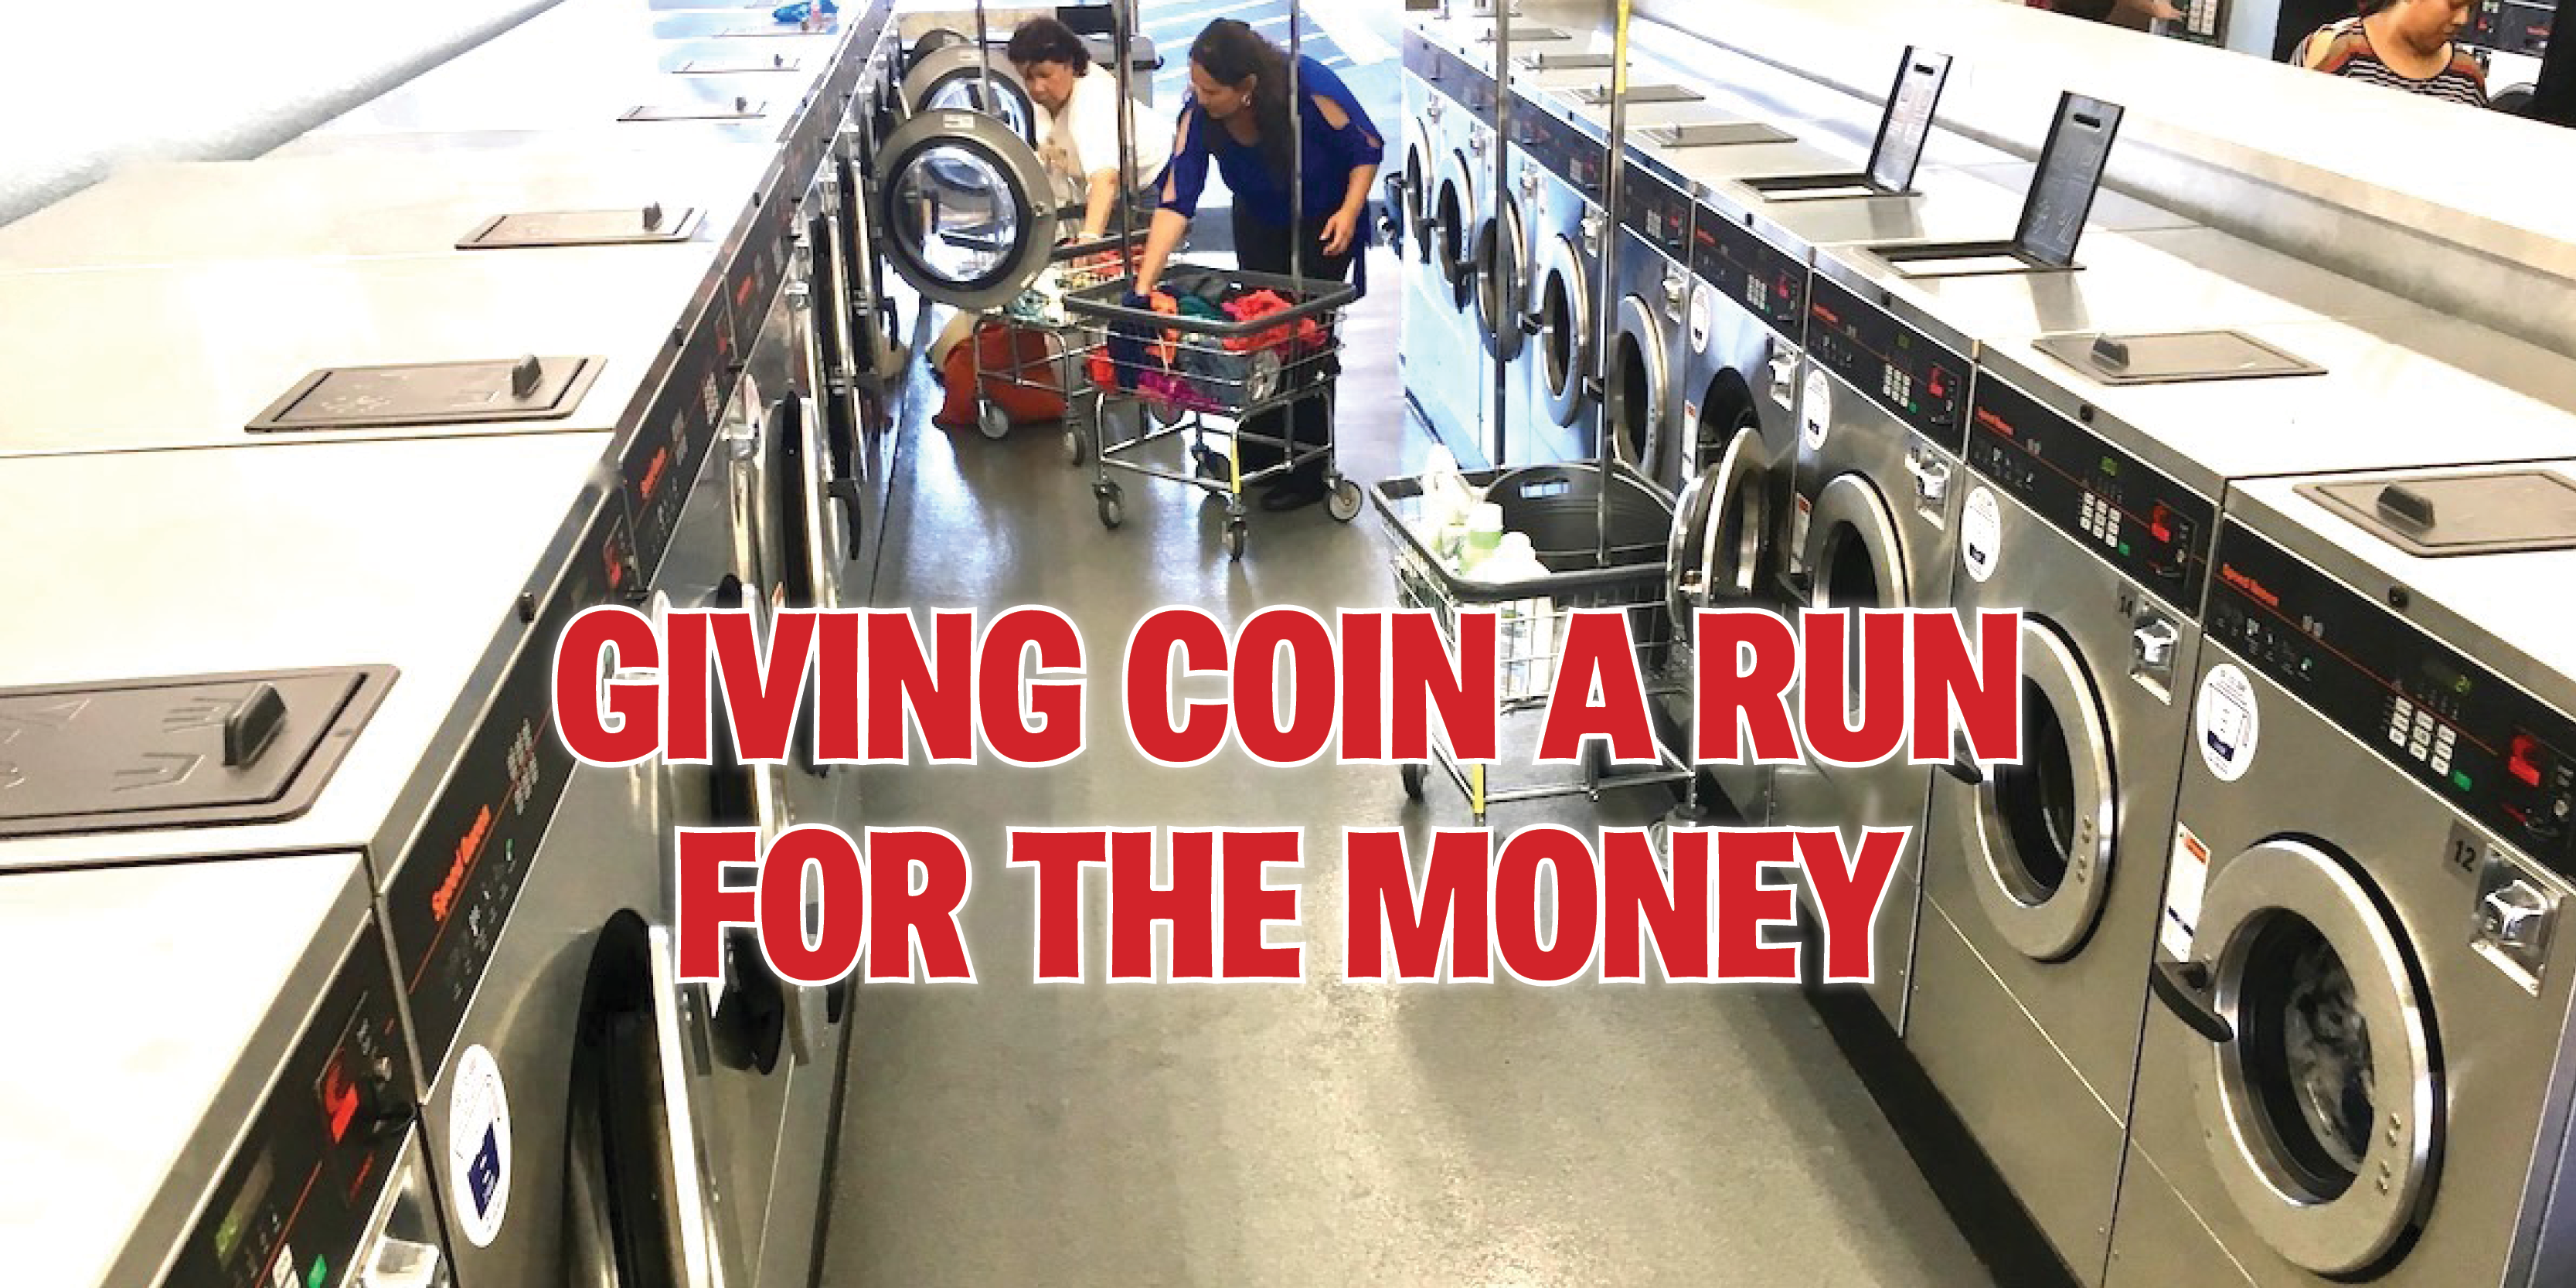 Laundry isn't ready for Dollar Coin Only – Imonex – The Legend In